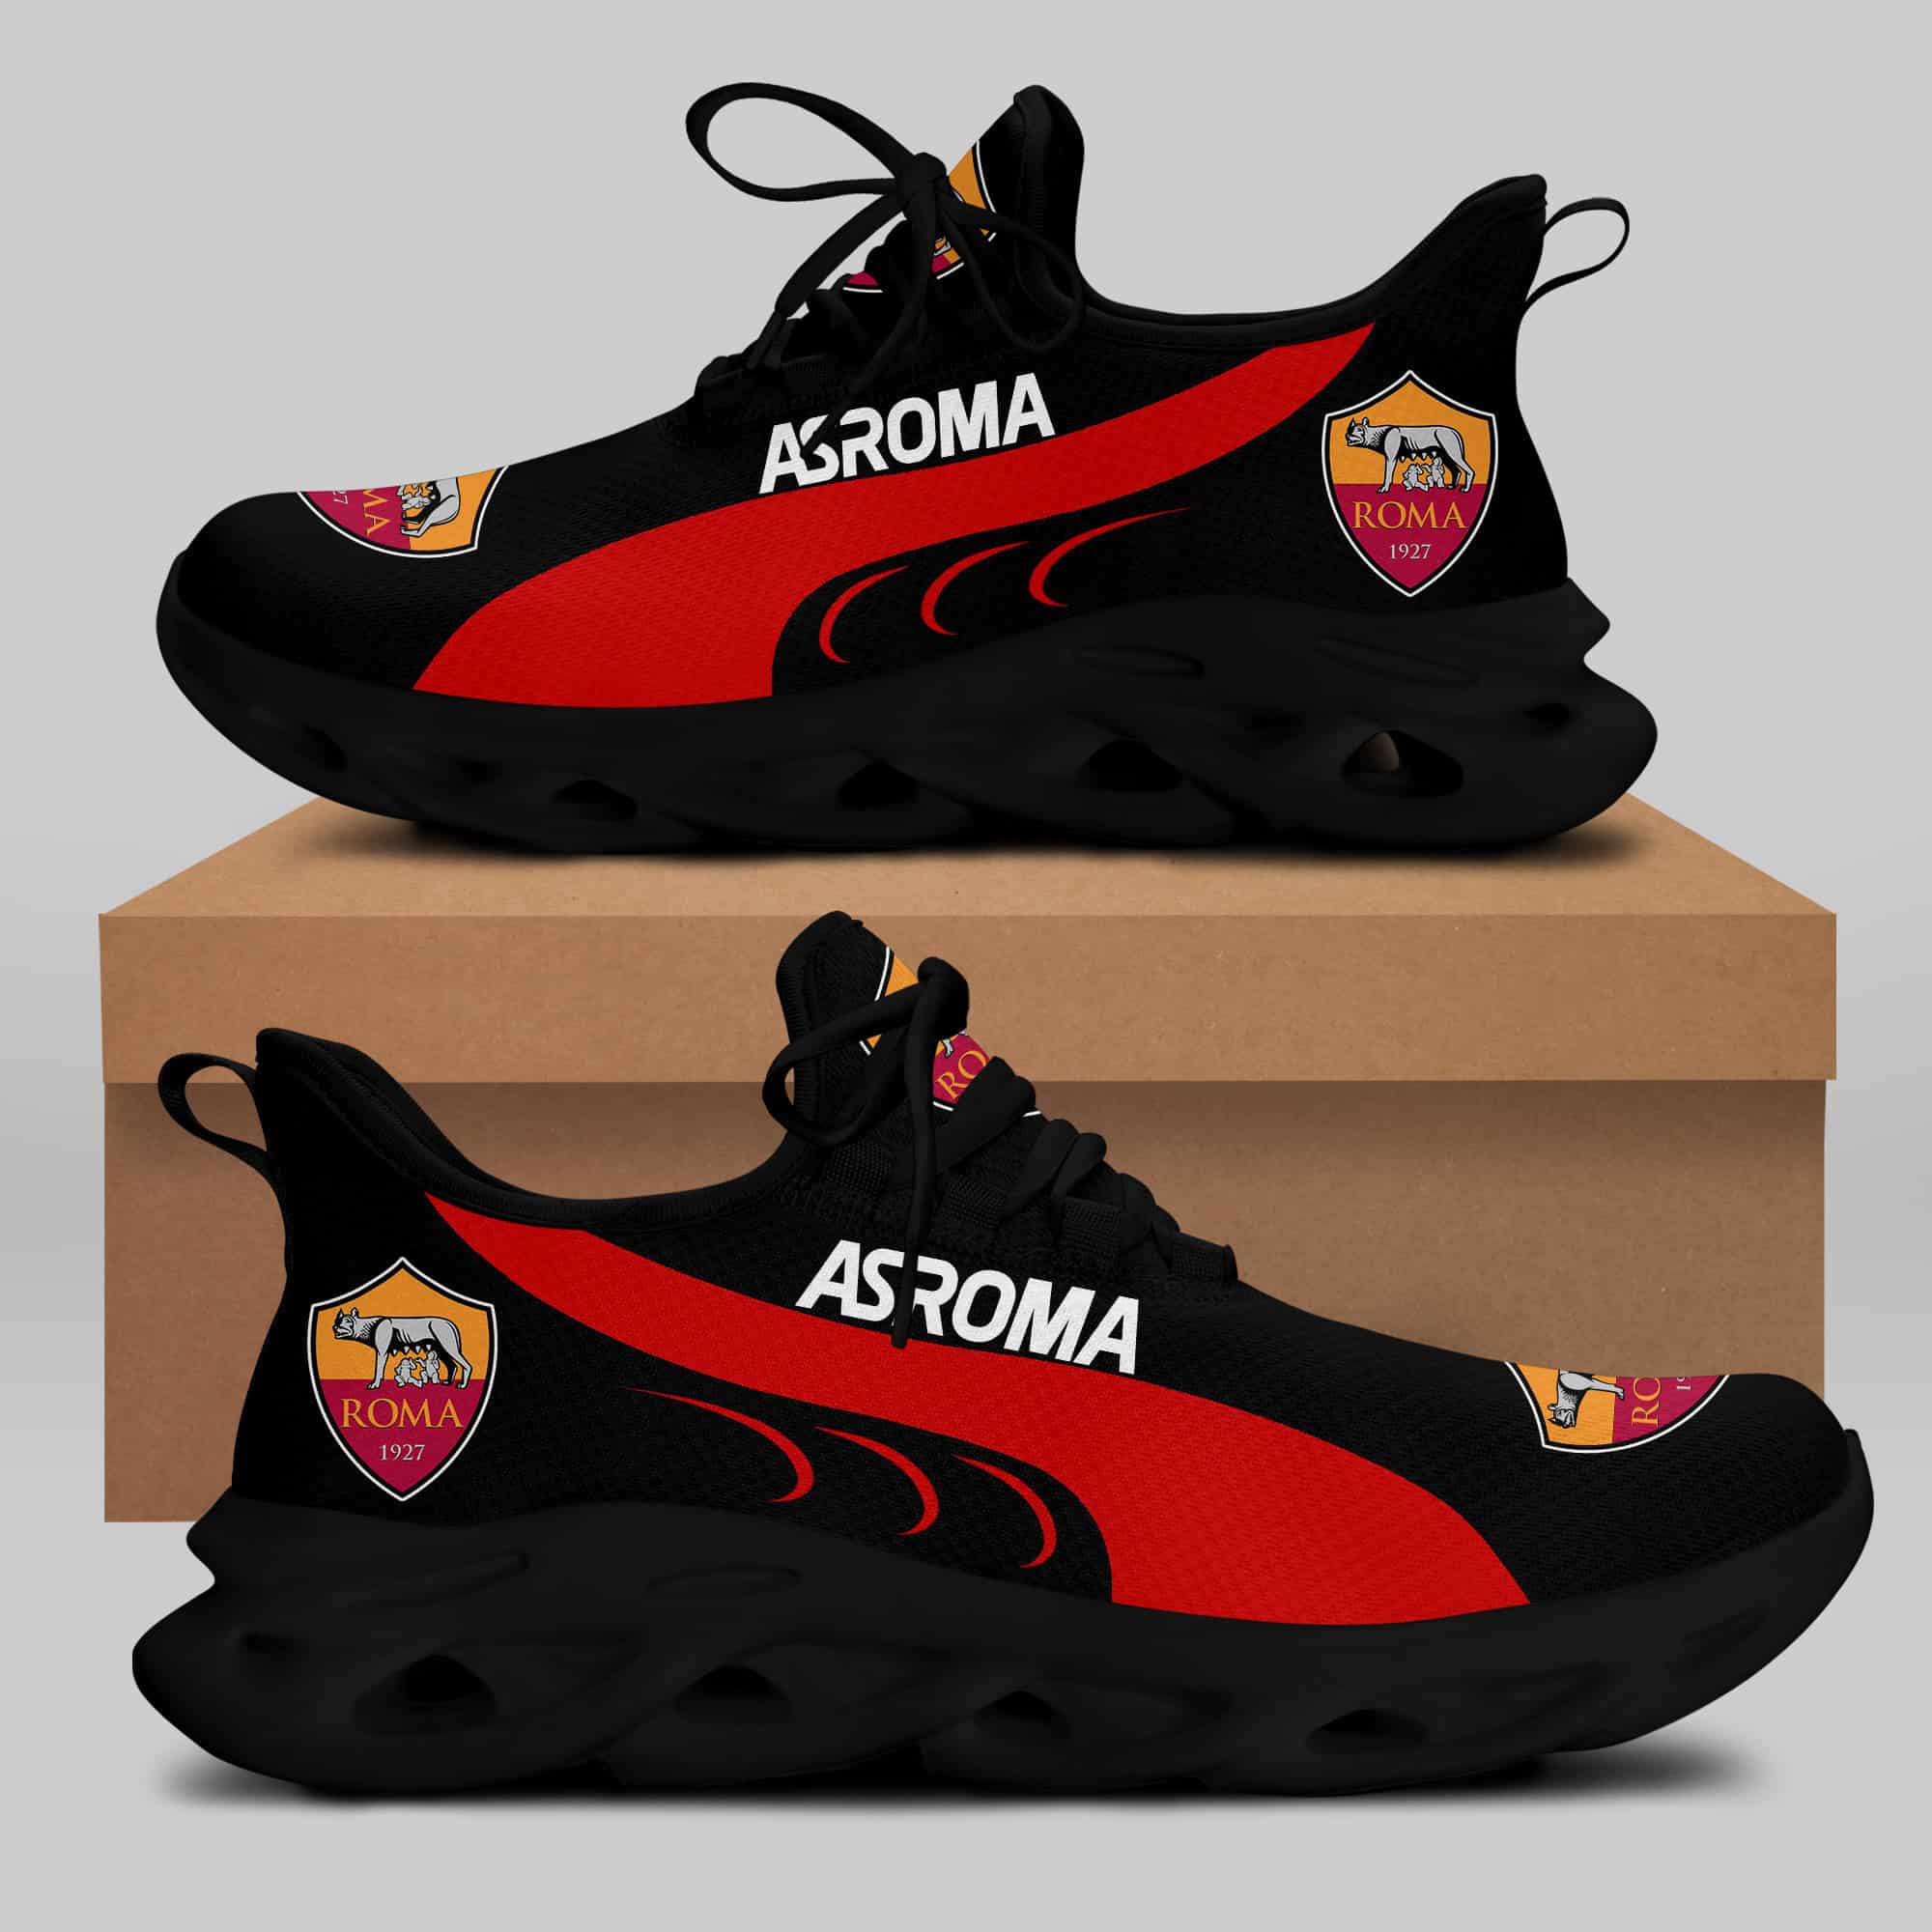 As Roma Running Shoes Max Soul Shoes Sneakers Ver 1 1